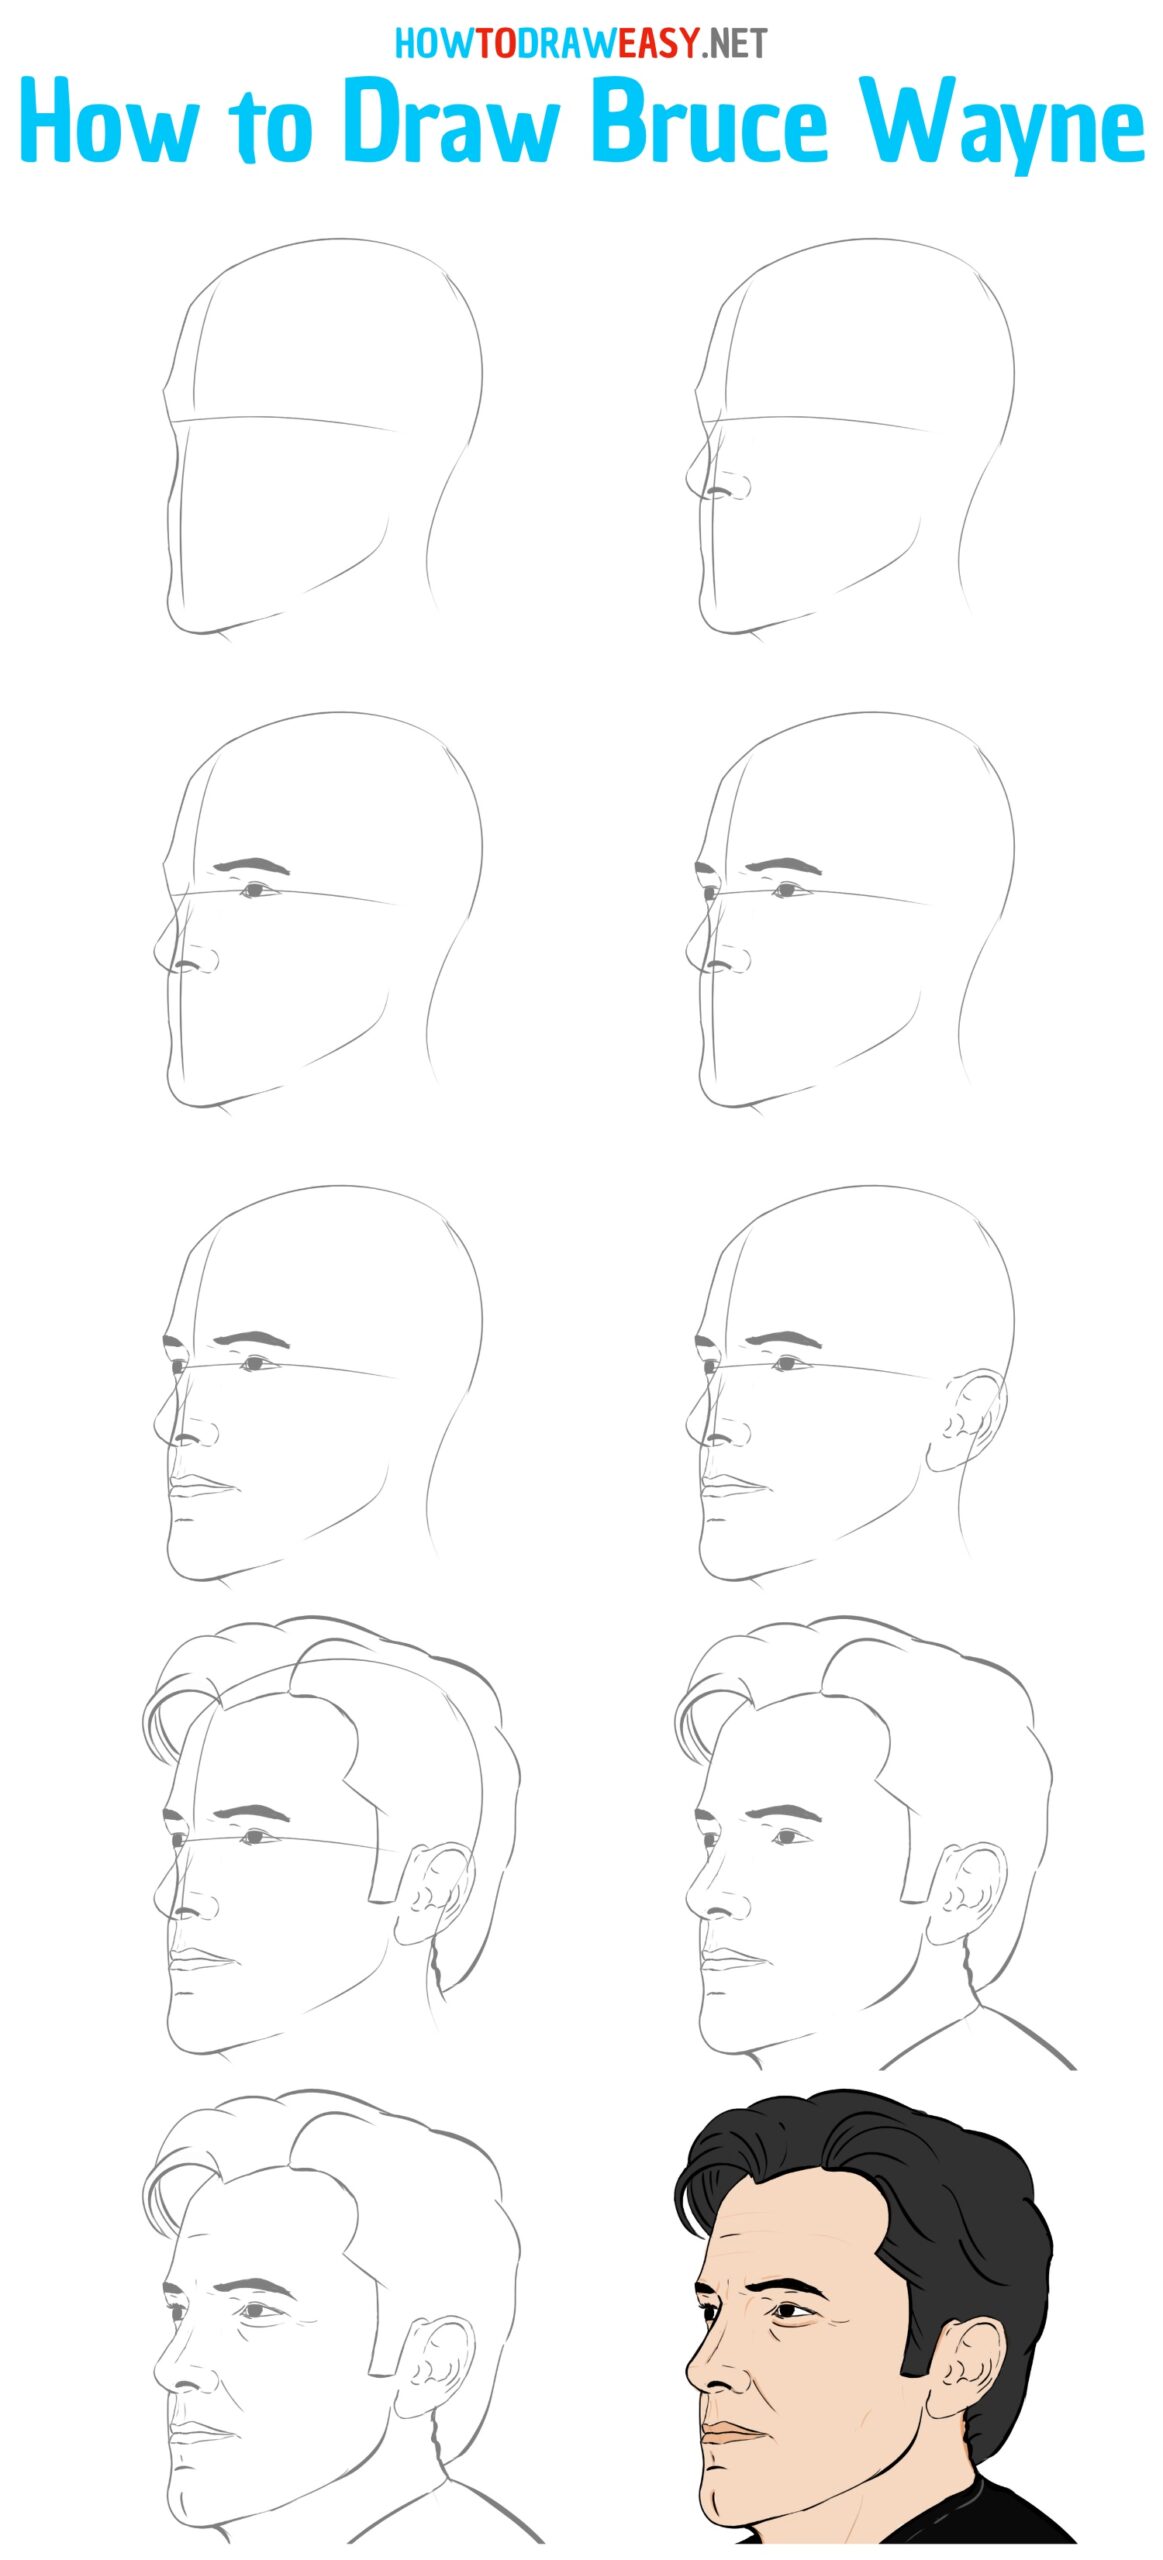 How to Draw Bruce Wayne Step by Step